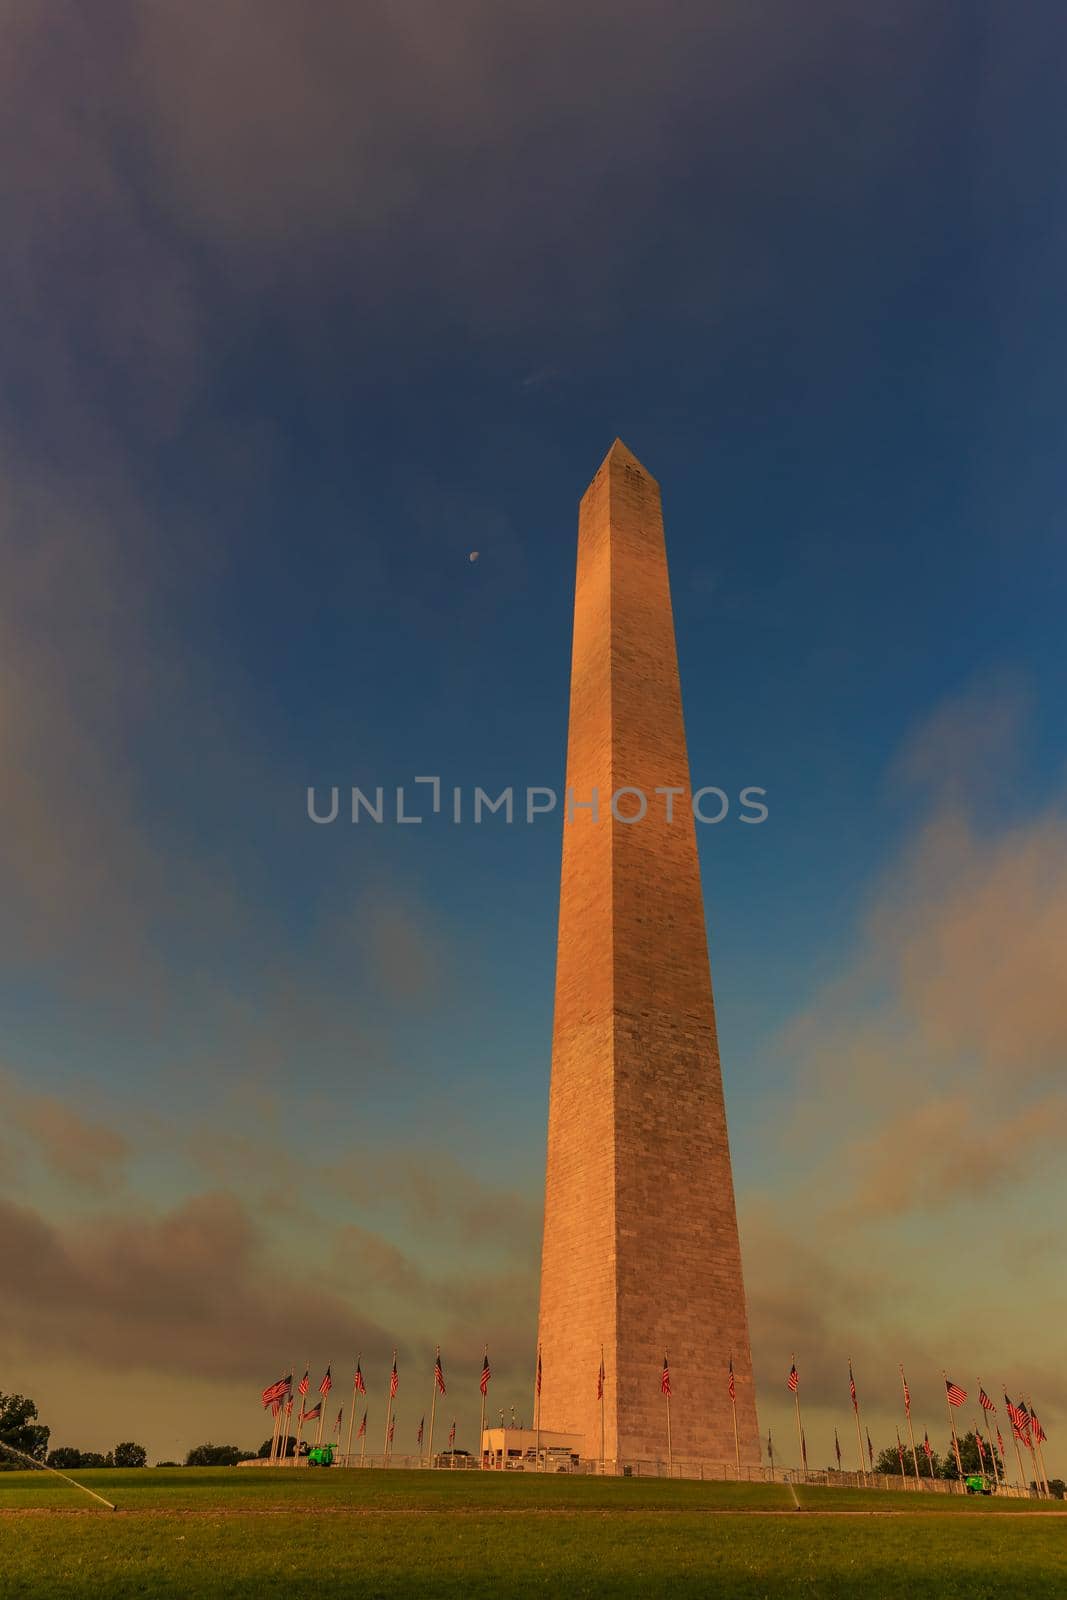 Washington Monument viewed in the early morning.